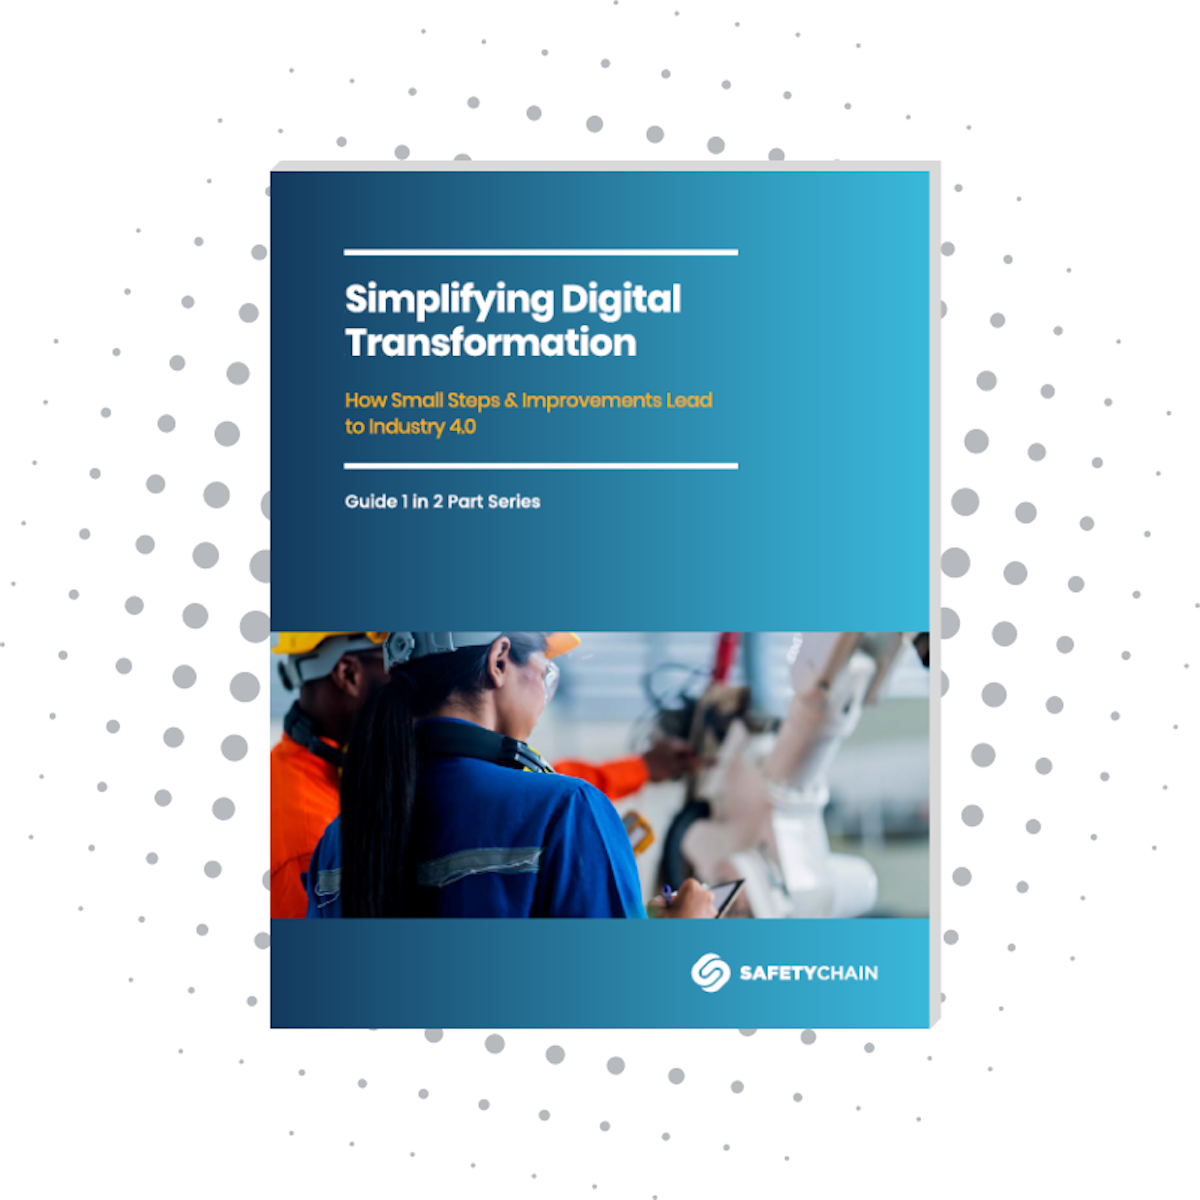 Simplifying Digital Transformation: How Small Steps & Improvements Lead to Industry 4.0